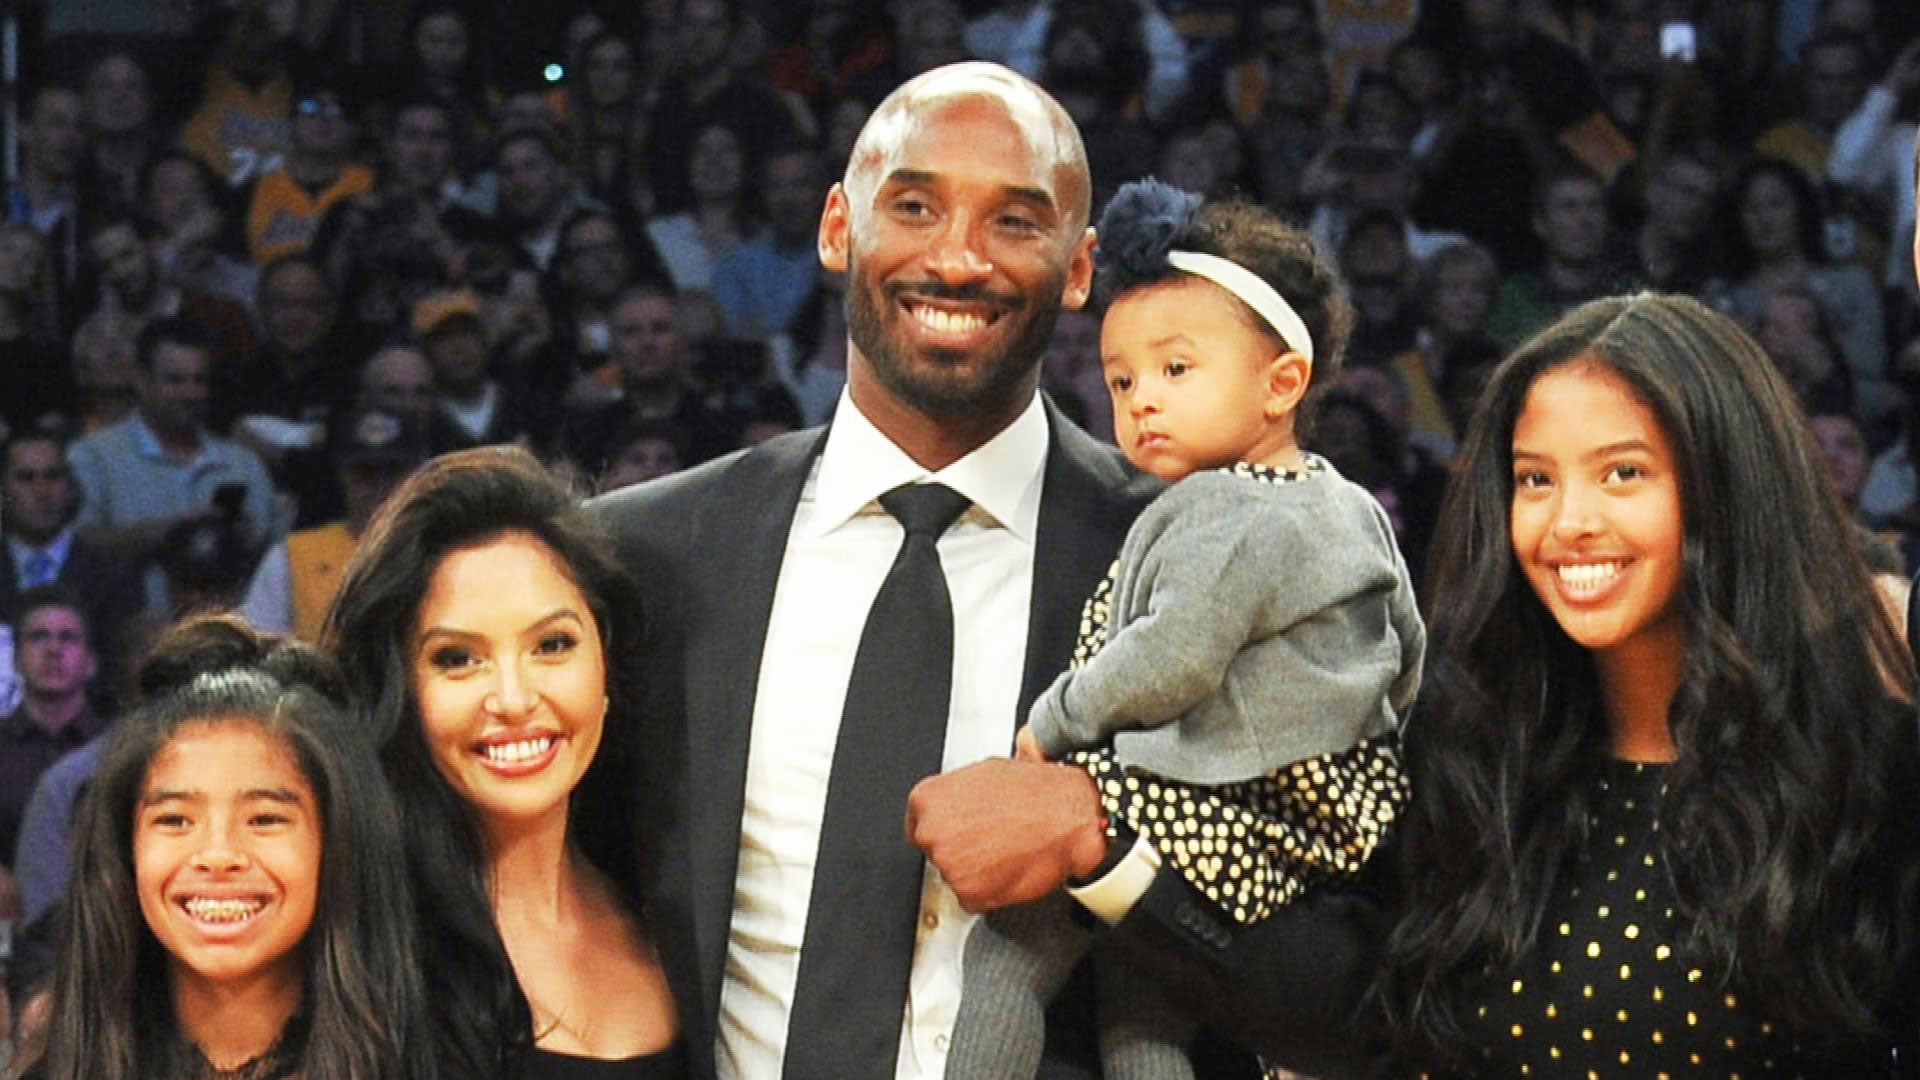 Kobe Bryant's Partner All You Need To Know About His Wife